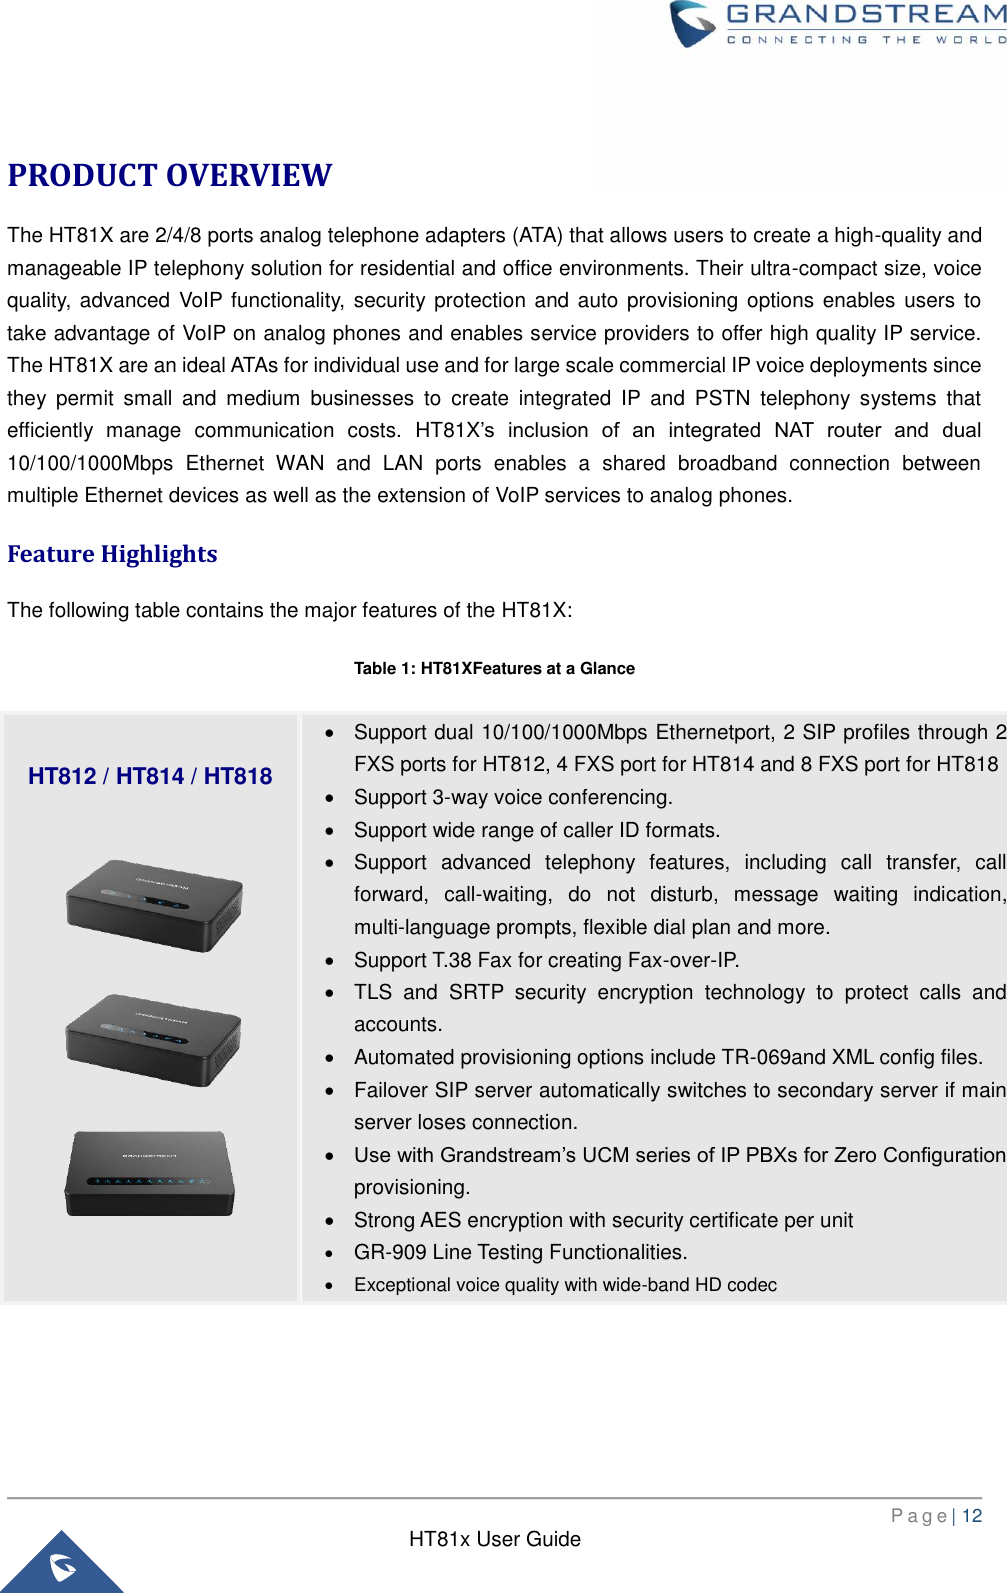       P a g e | 12      HT81x User Guide   PRODUCT OVERVIEW The HT81X are 2/4/8 ports analog telephone adapters (ATA) that allows users to create a high-quality and manageable IP telephony solution for residential and office environments. Their ultra-compact size, voice quality, advanced VoIP functionality, security protection  and auto  provisioning options enables users  to take advantage of VoIP on analog phones and enables service providers to offer high quality IP service. The HT81X are an ideal ATAs for individual use and for large scale commercial IP voice deployments since they  permit  small  and  medium  businesses  to  create  integrated  IP  and  PSTN  telephony  systems  that efficiently  manage  communication  costs.  HT81X’s  inclusion  of  an  integrated  NAT  router  and  dual 10/100/1000Mbps  Ethernet  WAN  and  LAN  ports  enables  a  shared  broadband  connection  between multiple Ethernet devices as well as the extension of VoIP services to analog phones. Feature Highlights The following table contains the major features of the HT81X: Table 1: HT81XFeatures at a Glance      HT812 / HT814 / HT818   Support dual 10/100/1000Mbps Ethernetport, 2 SIP profiles through 2 FXS ports for HT812, 4 FXS port for HT814 and 8 FXS port for HT818   Support 3-way voice conferencing.   Support wide range of caller ID formats.   Support  advanced  telephony  features,  including  call  transfer,  call forward,  call-waiting,  do  not  disturb,  message  waiting  indication, multi-language prompts, flexible dial plan and more.   Support T.38 Fax for creating Fax-over-IP.     TLS  and  SRTP  security  encryption  technology  to  protect  calls  and accounts.   Automated provisioning options include TR-069and XML config files.   Failover SIP server automatically switches to secondary server if main server loses connection.  Use with Grandstream’s UCM series of IP PBXs for Zero Configuration provisioning.   Strong AES encryption with security certificate per unit  GR-909 Line Testing Functionalities.   Exceptional voice quality with wide-band HD codec 